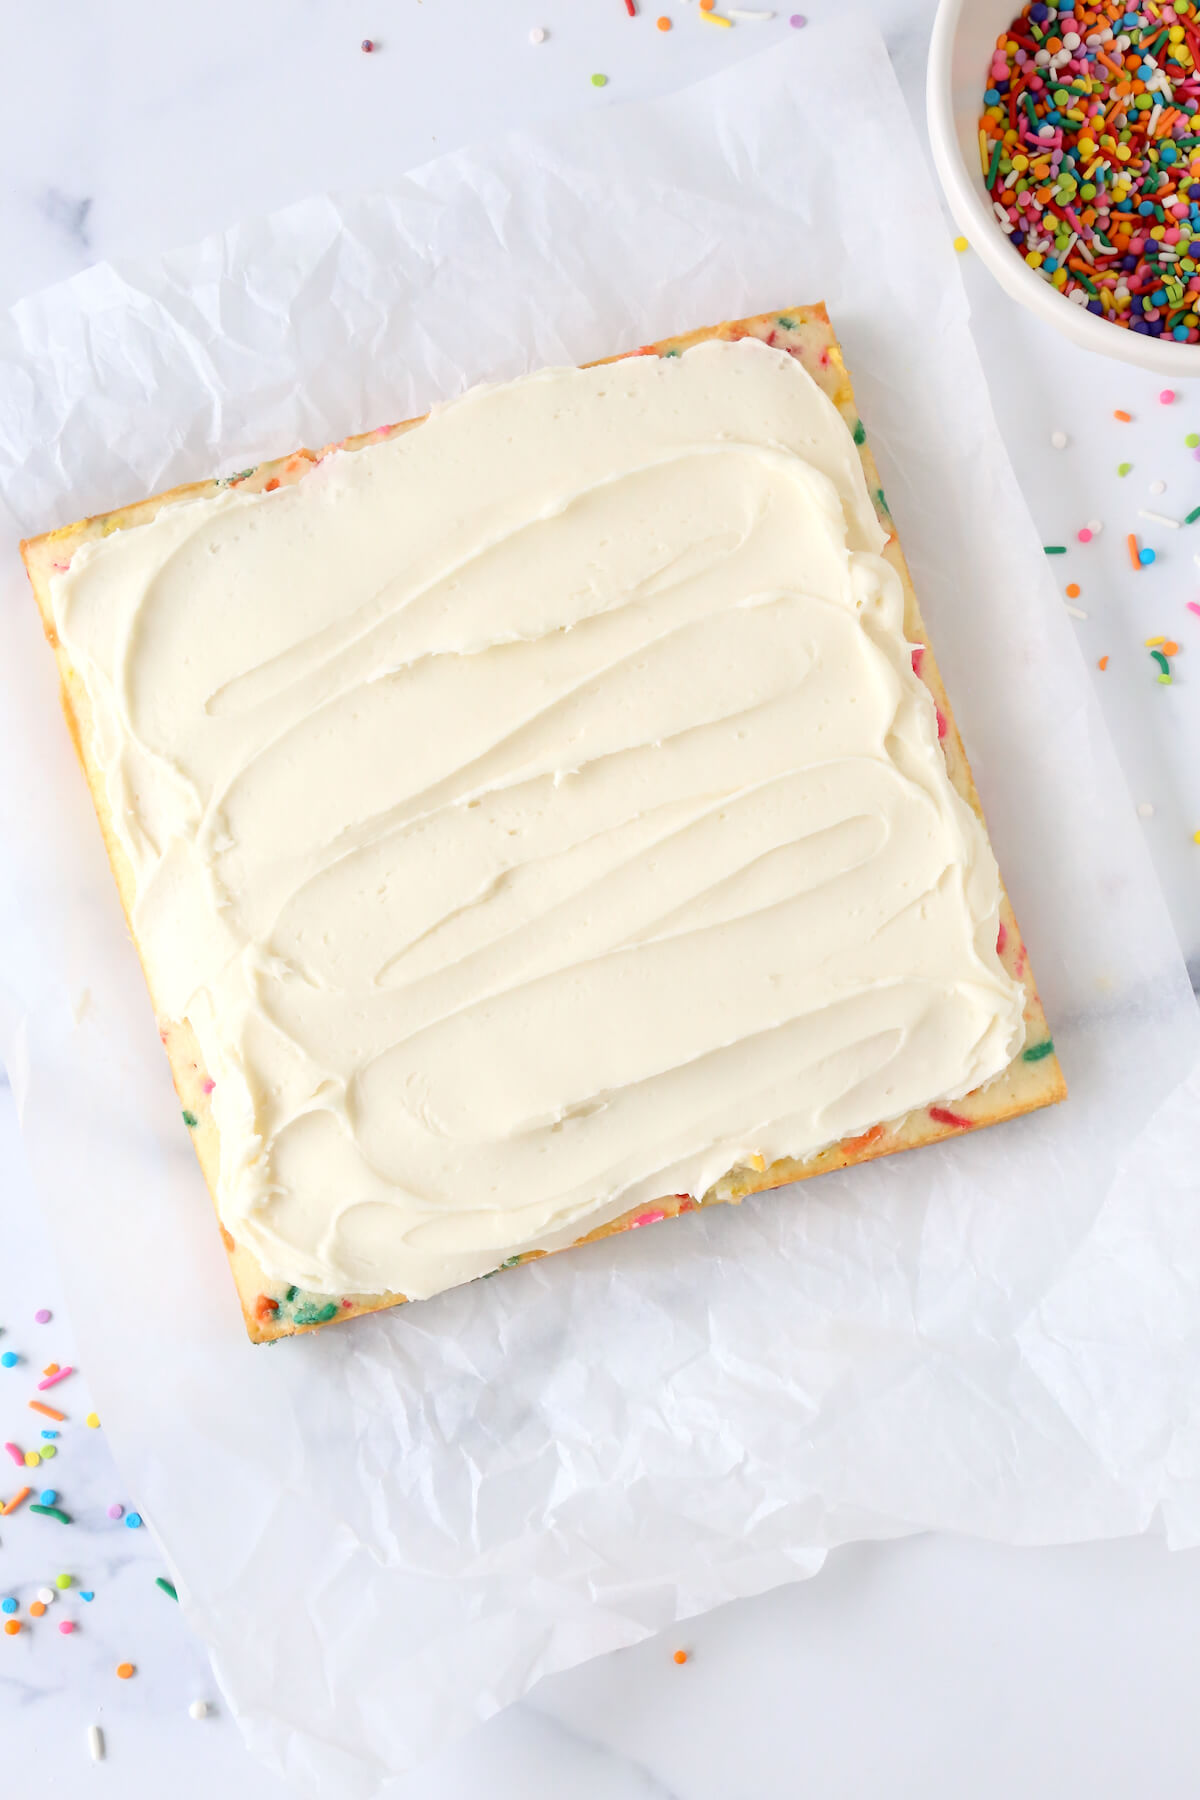 A square cake with white frosting spread on top.